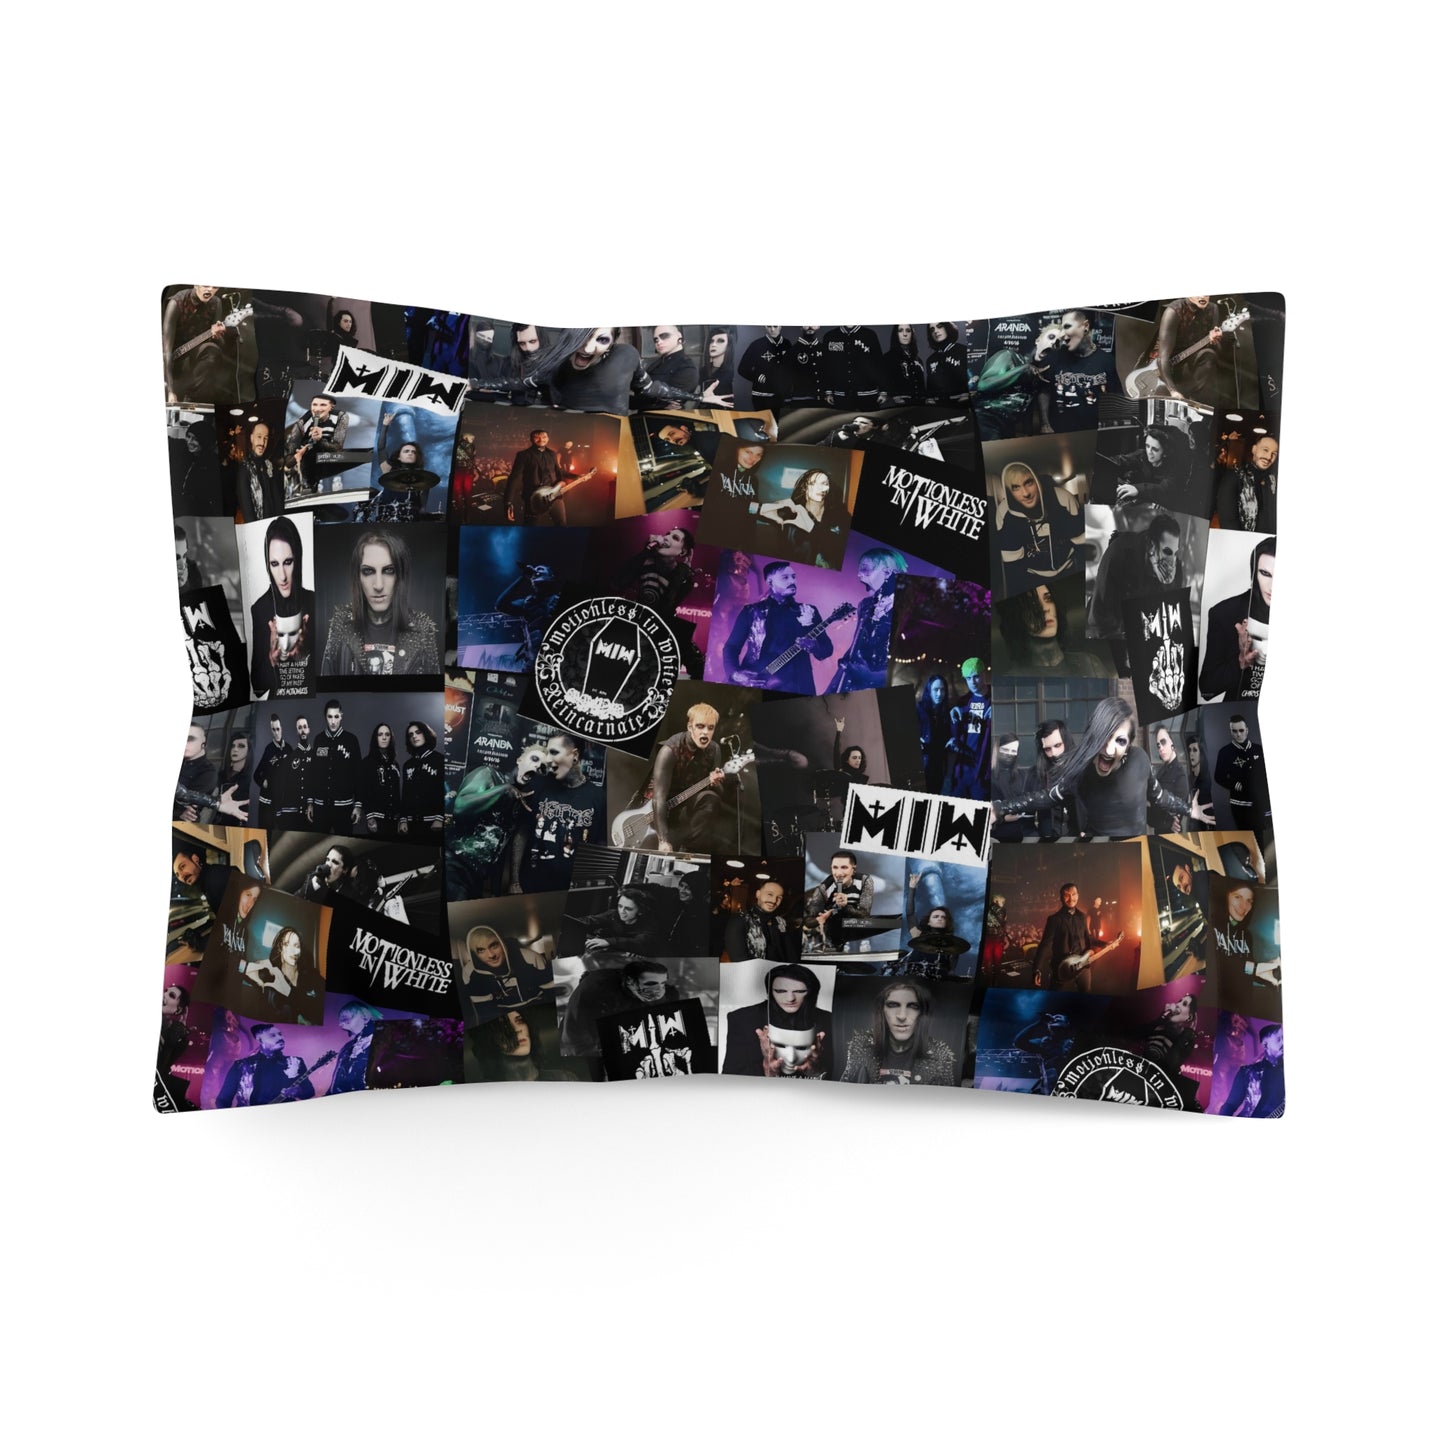 Motionless In White Photo Collage Microfiber Pillow Sham